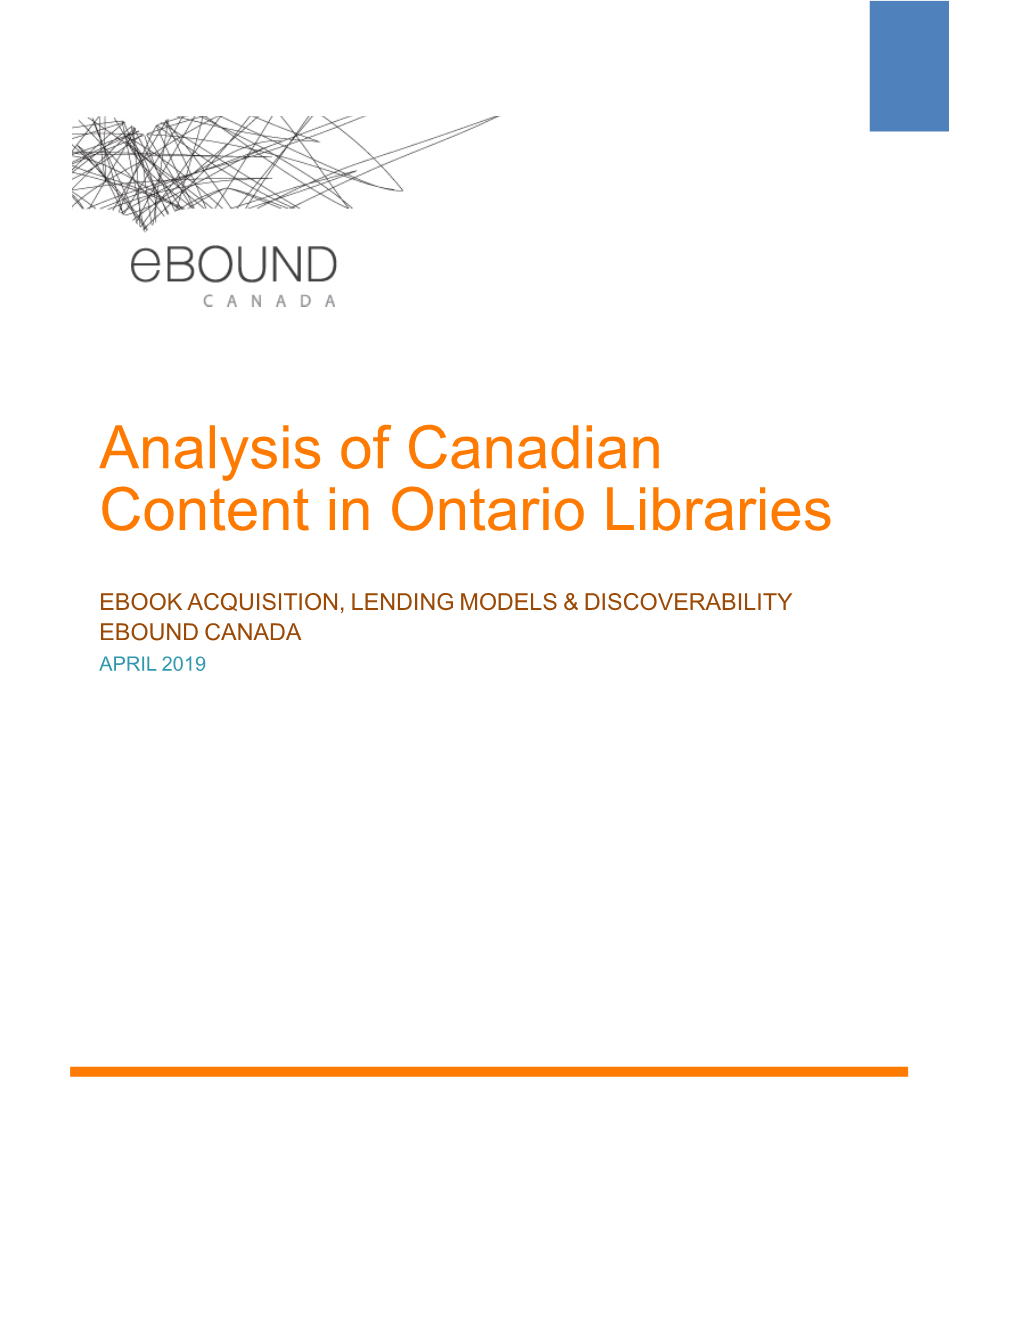 Analysis of Canadian Content in Ontario Libraries | April 2019